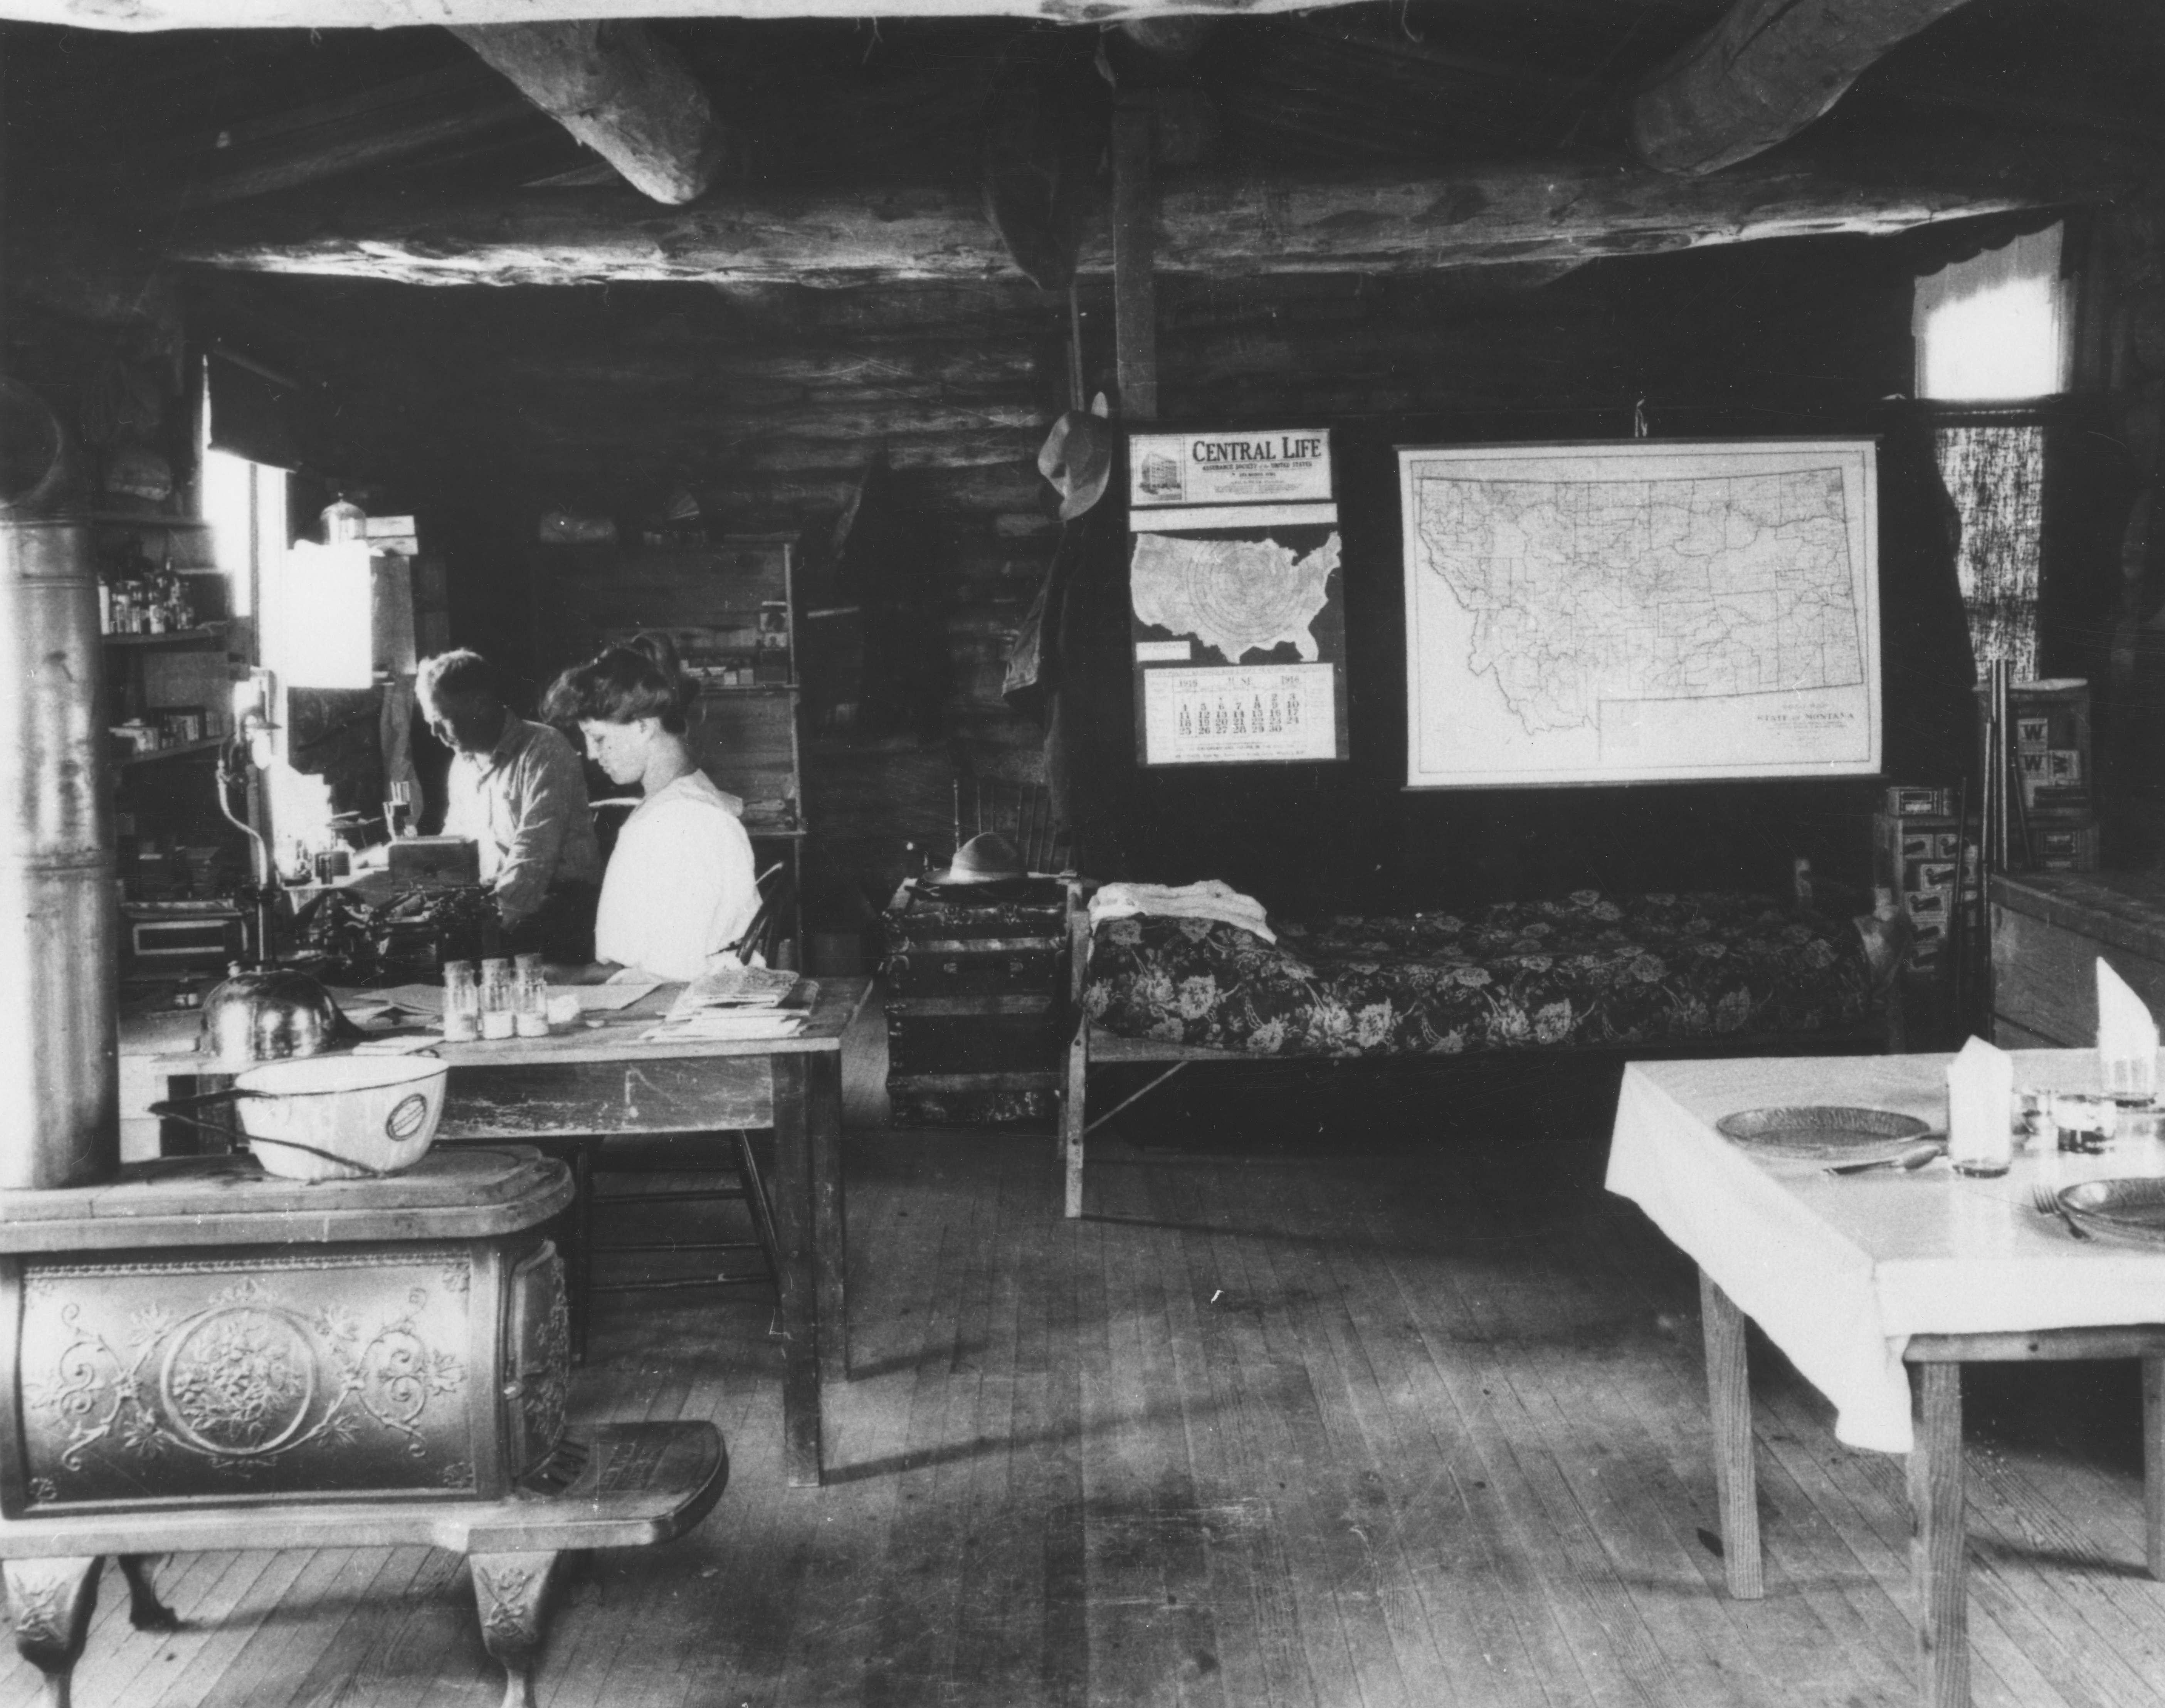  Dr. Ralph Parker in a log cabin in Montana. A woodstove is visible and the cabin is furnished with rustic decor.